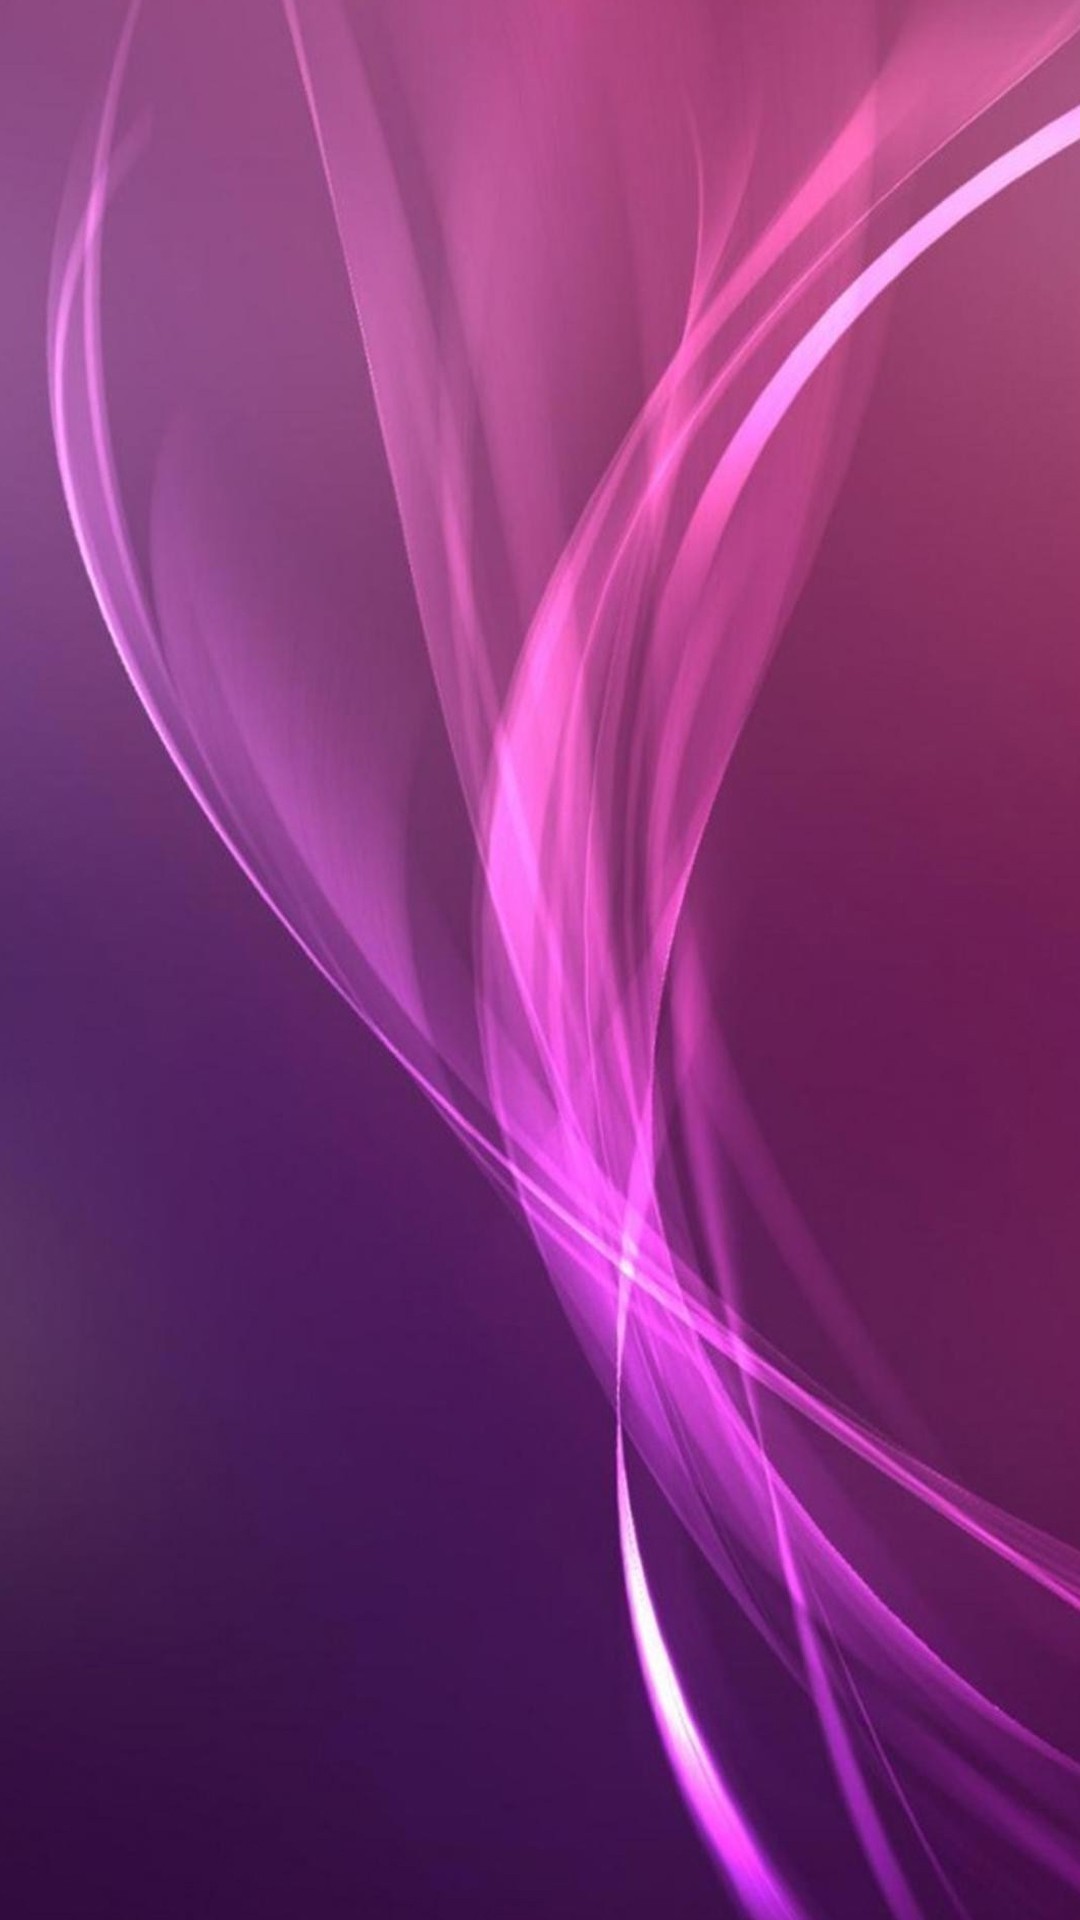 1080x1920 http://mwp4.me/abstract/purple-translucent-curves-